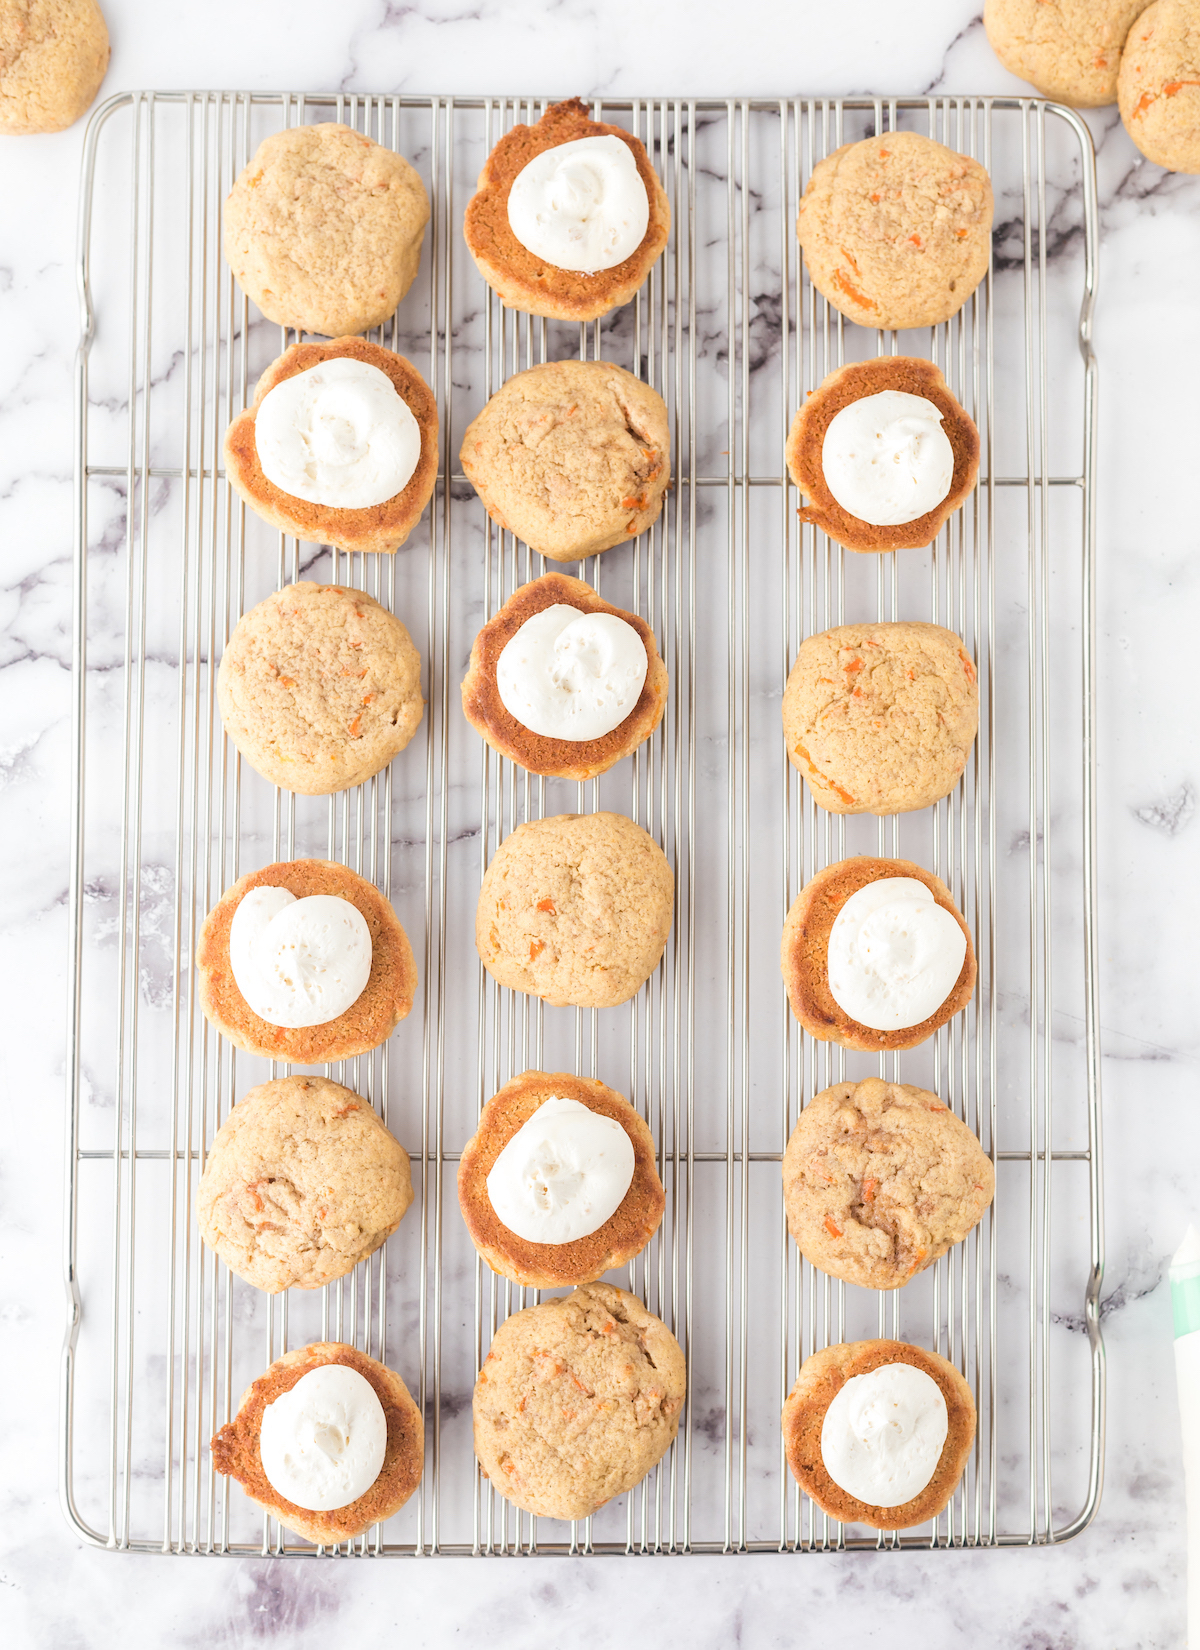 use a piping bag to place the frosting on the carrot cake whoopie pies